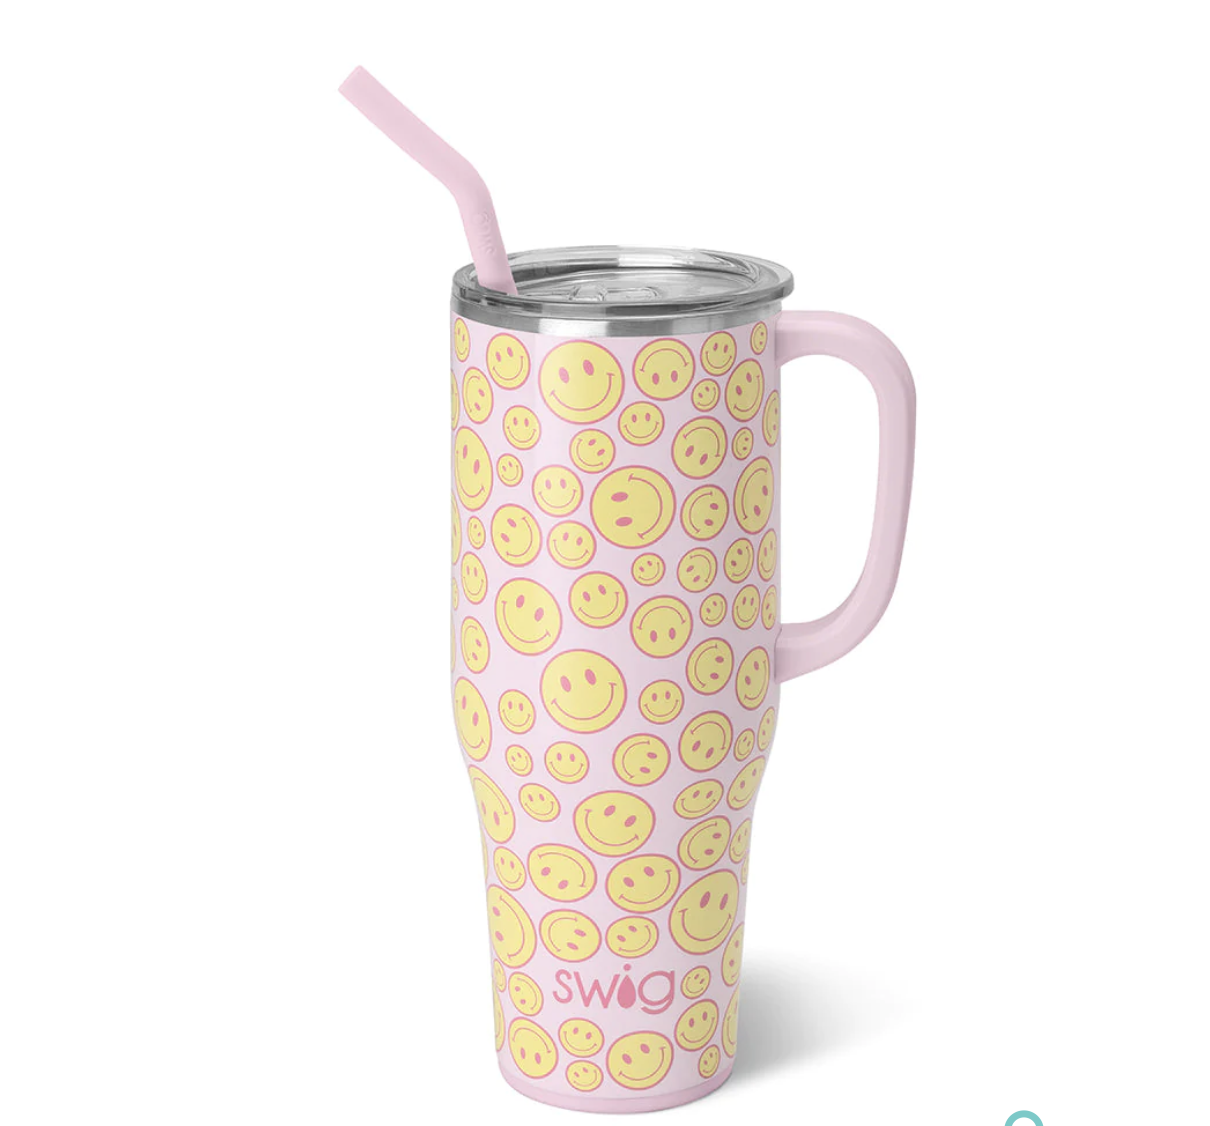 Swig Life Caliente Iced Cup Coolie